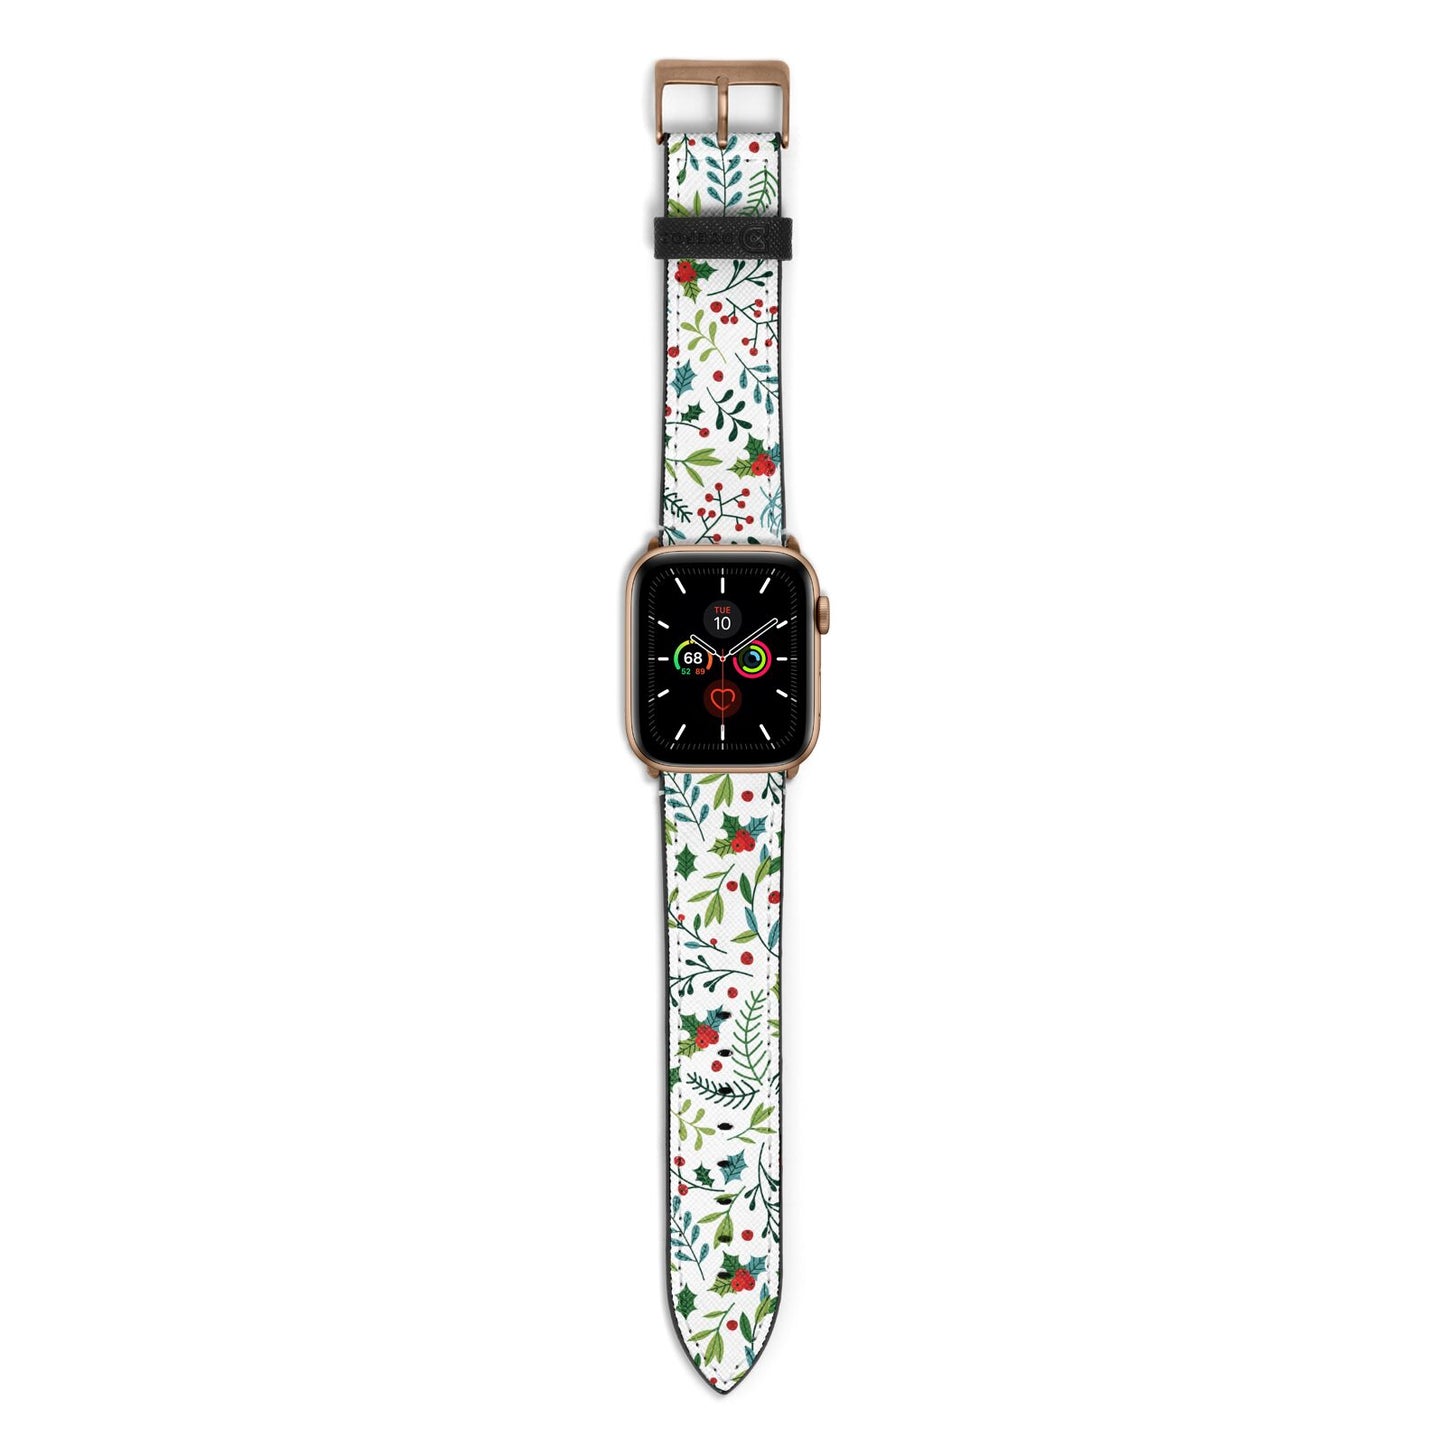 Winter Floral Apple Watch Strap with Gold Hardware